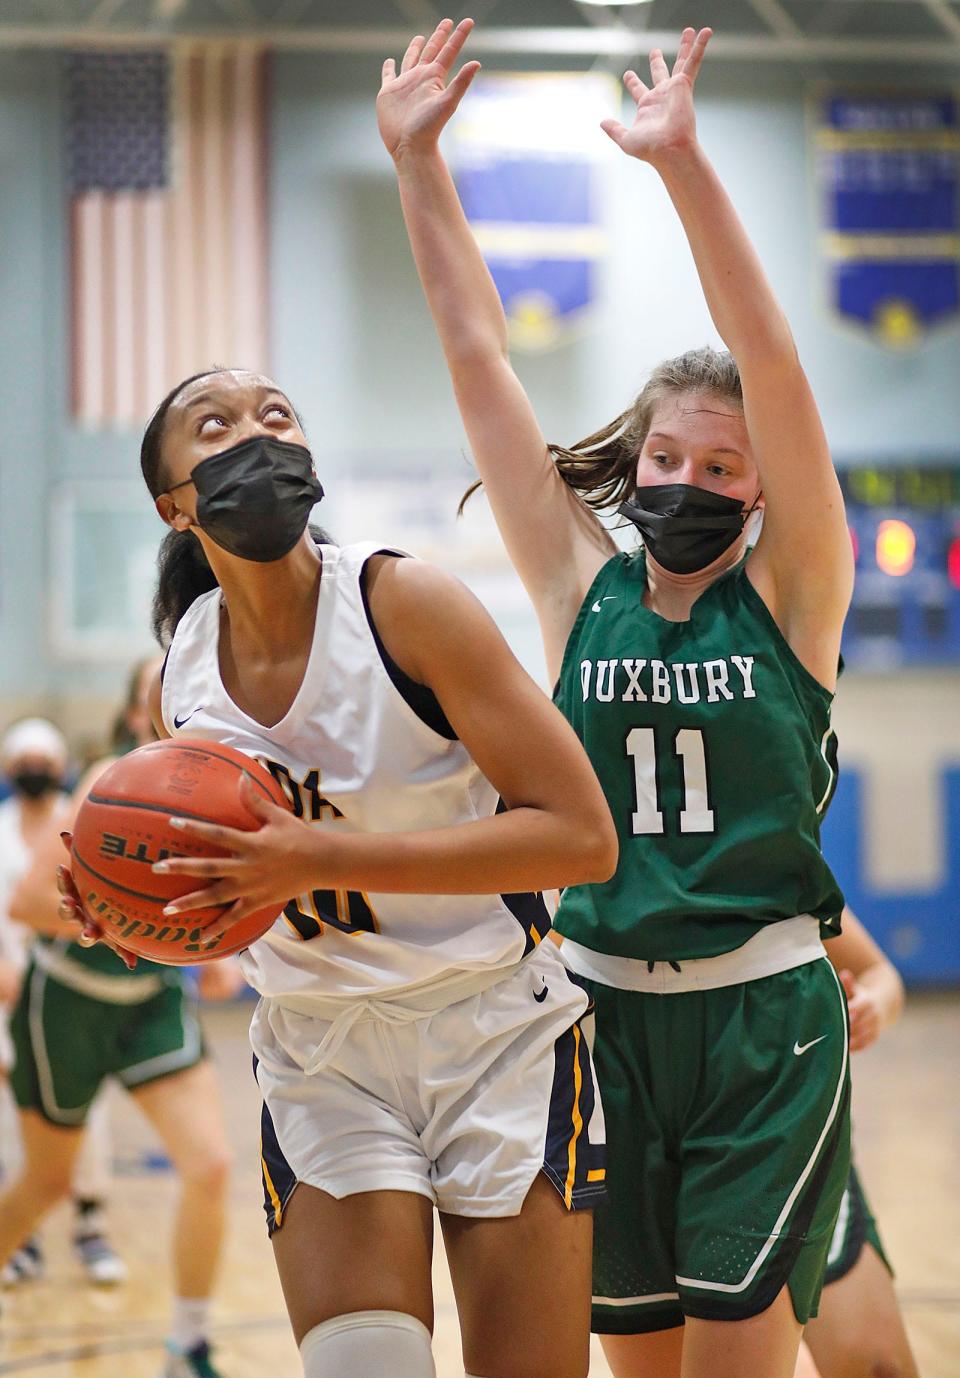 Notre Dame Academy's Kaylah Jacques set up for a shot as Duxbury's Lyla Peters looks to block. Notre Dame Academy hosts Duxbury girls basketball on Friday, Dec. 10, 2021.